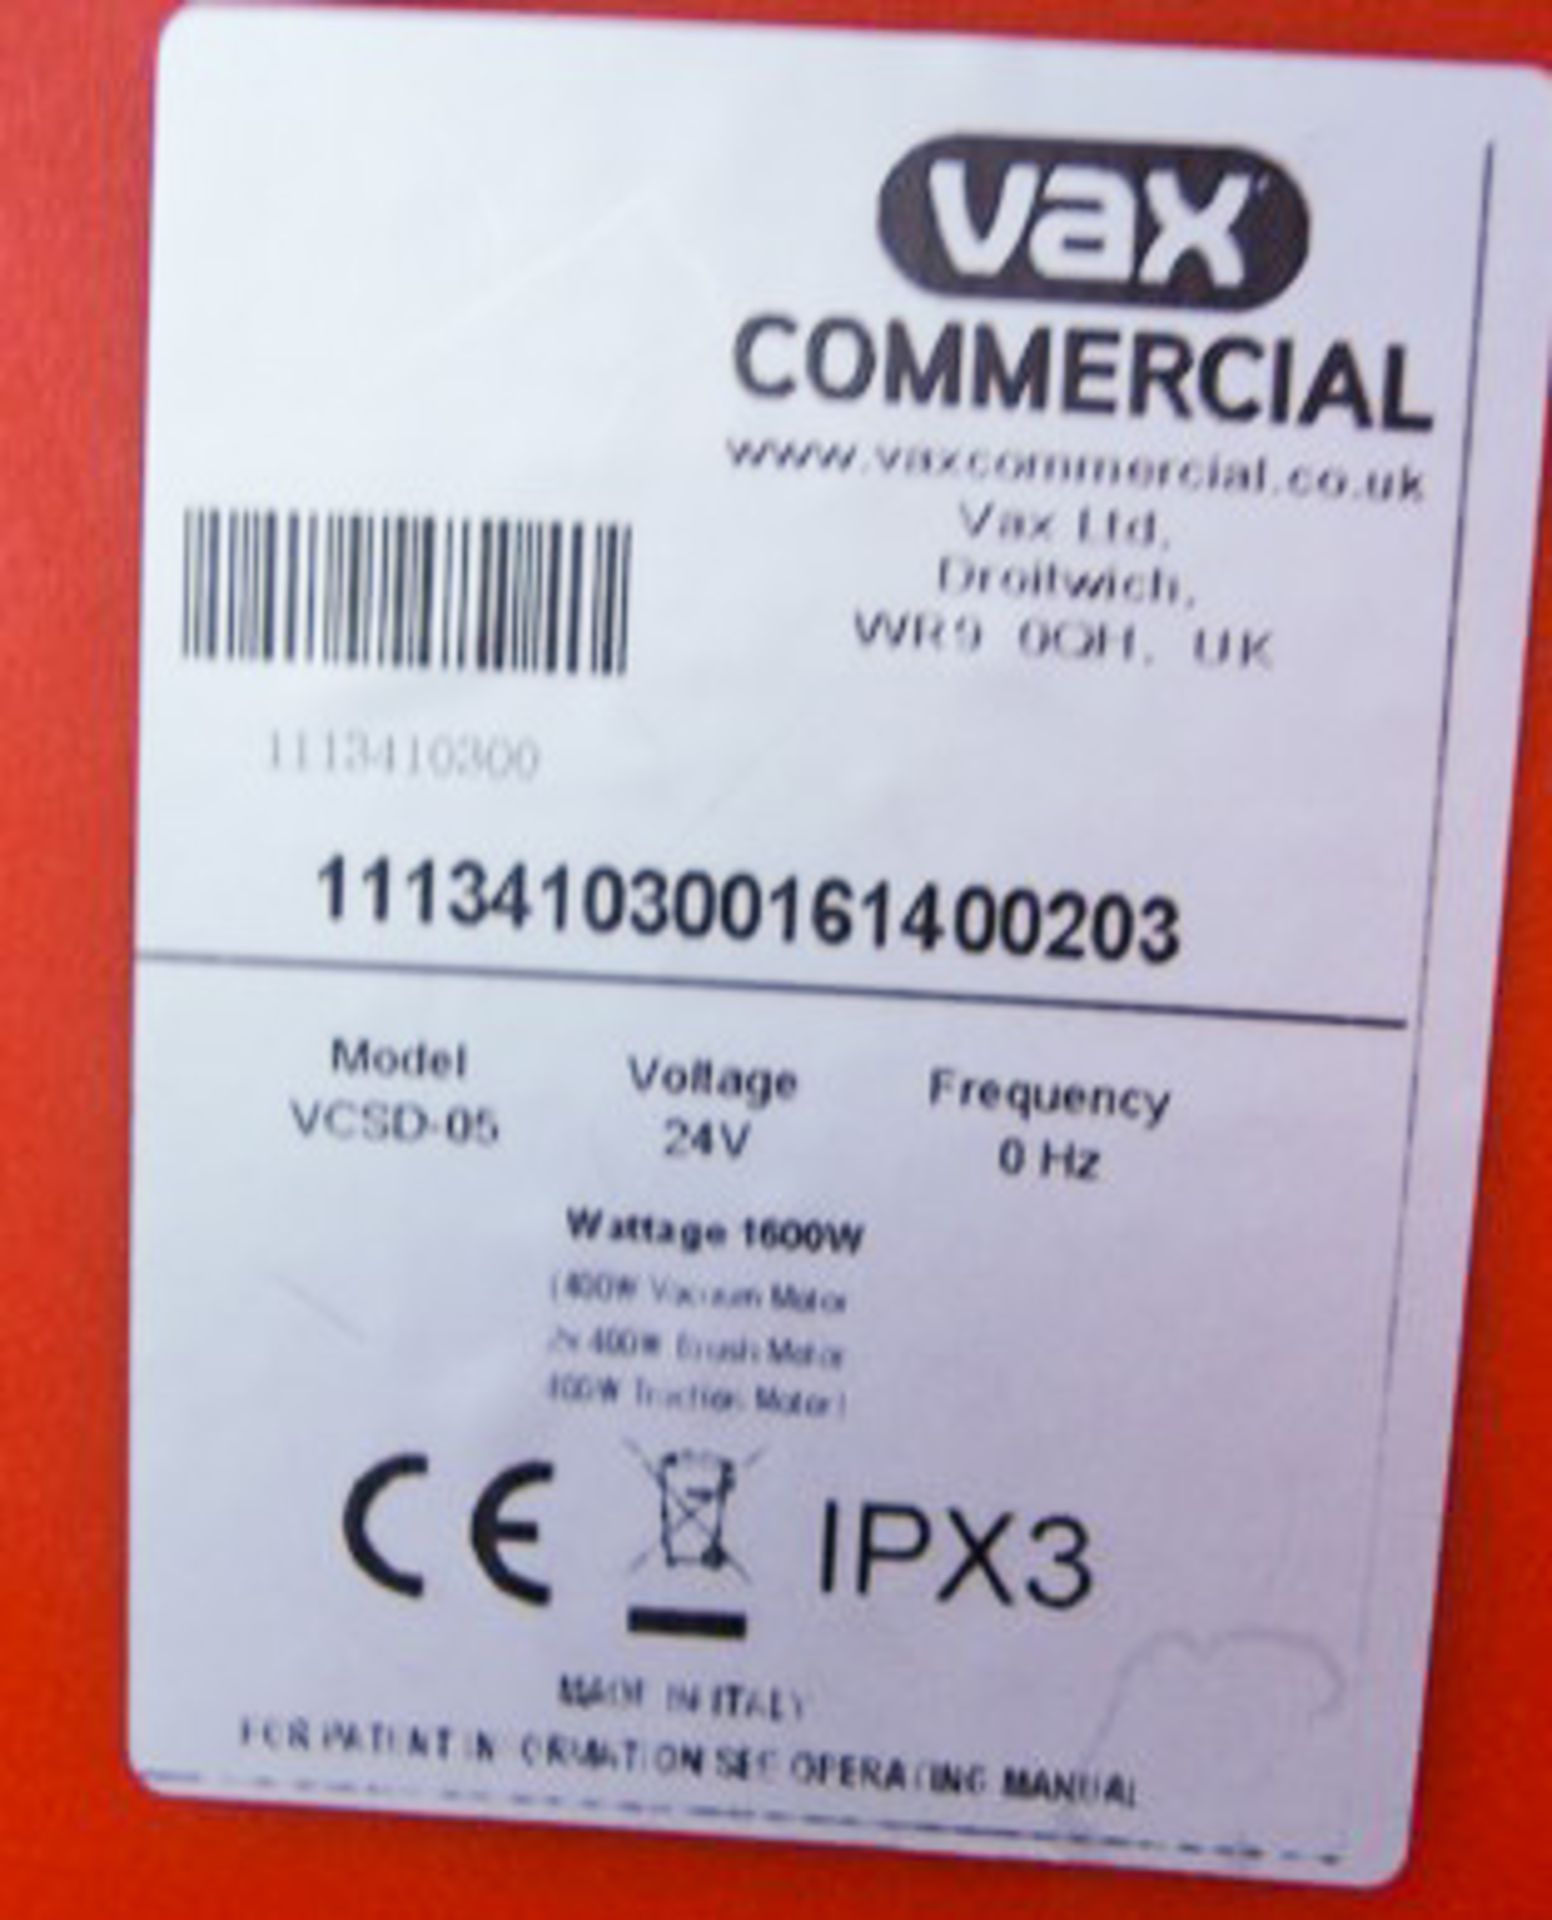 VAX VCSD-05 COMMERCIAL FLOOR CLEANER, MAINS CHARGER, 123HRS (NOT VERIFIED) - Image 12 of 13